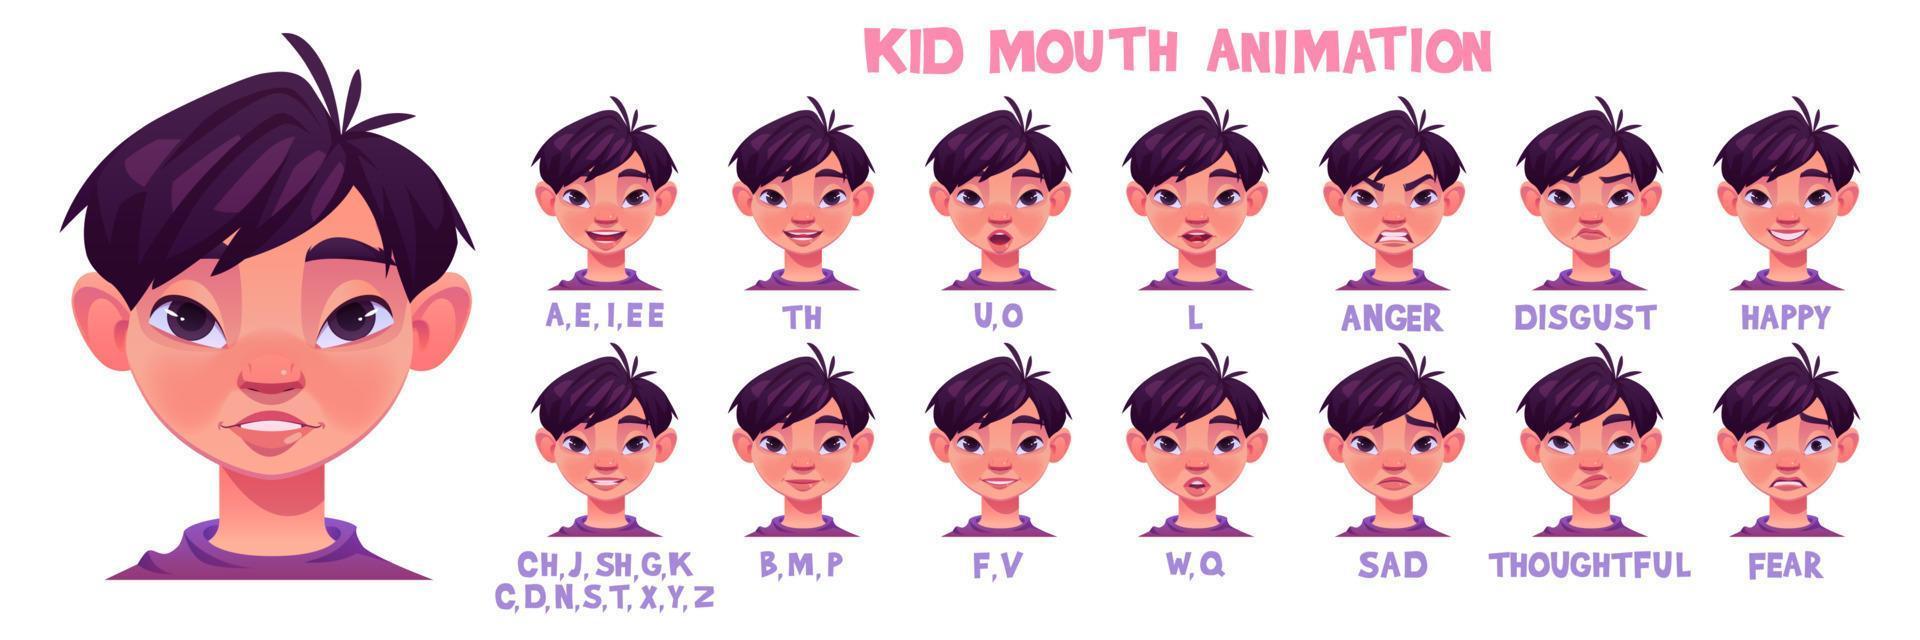 Kid mouth animation, different facial expressions vector